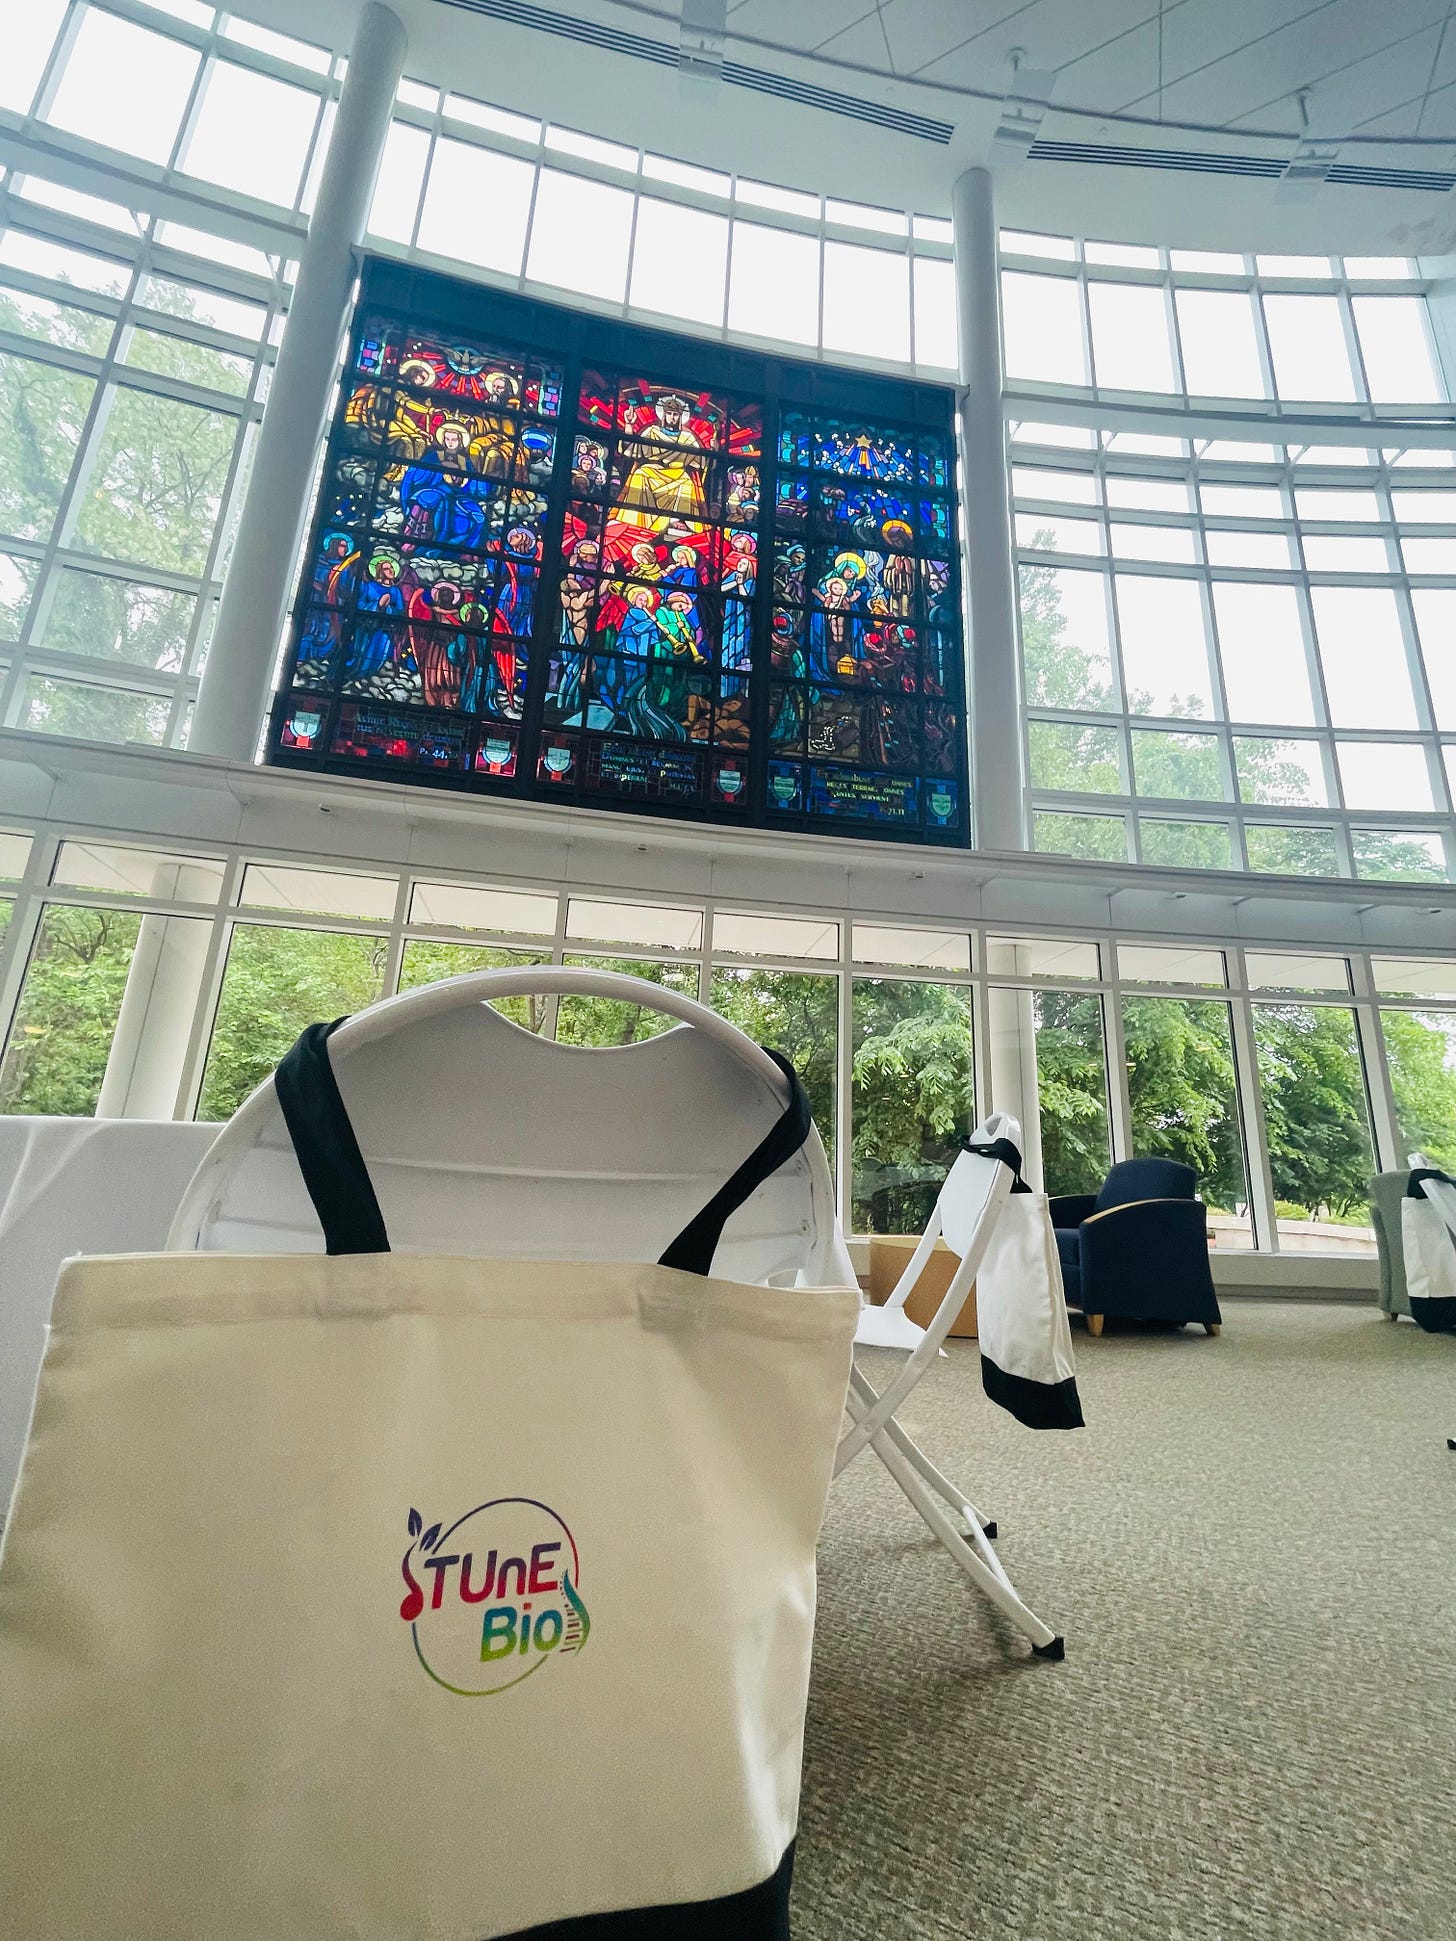 Black and white swag bags with "TUnE-Bio" label hung over a chair in a large lit atrium with stained glass windows.